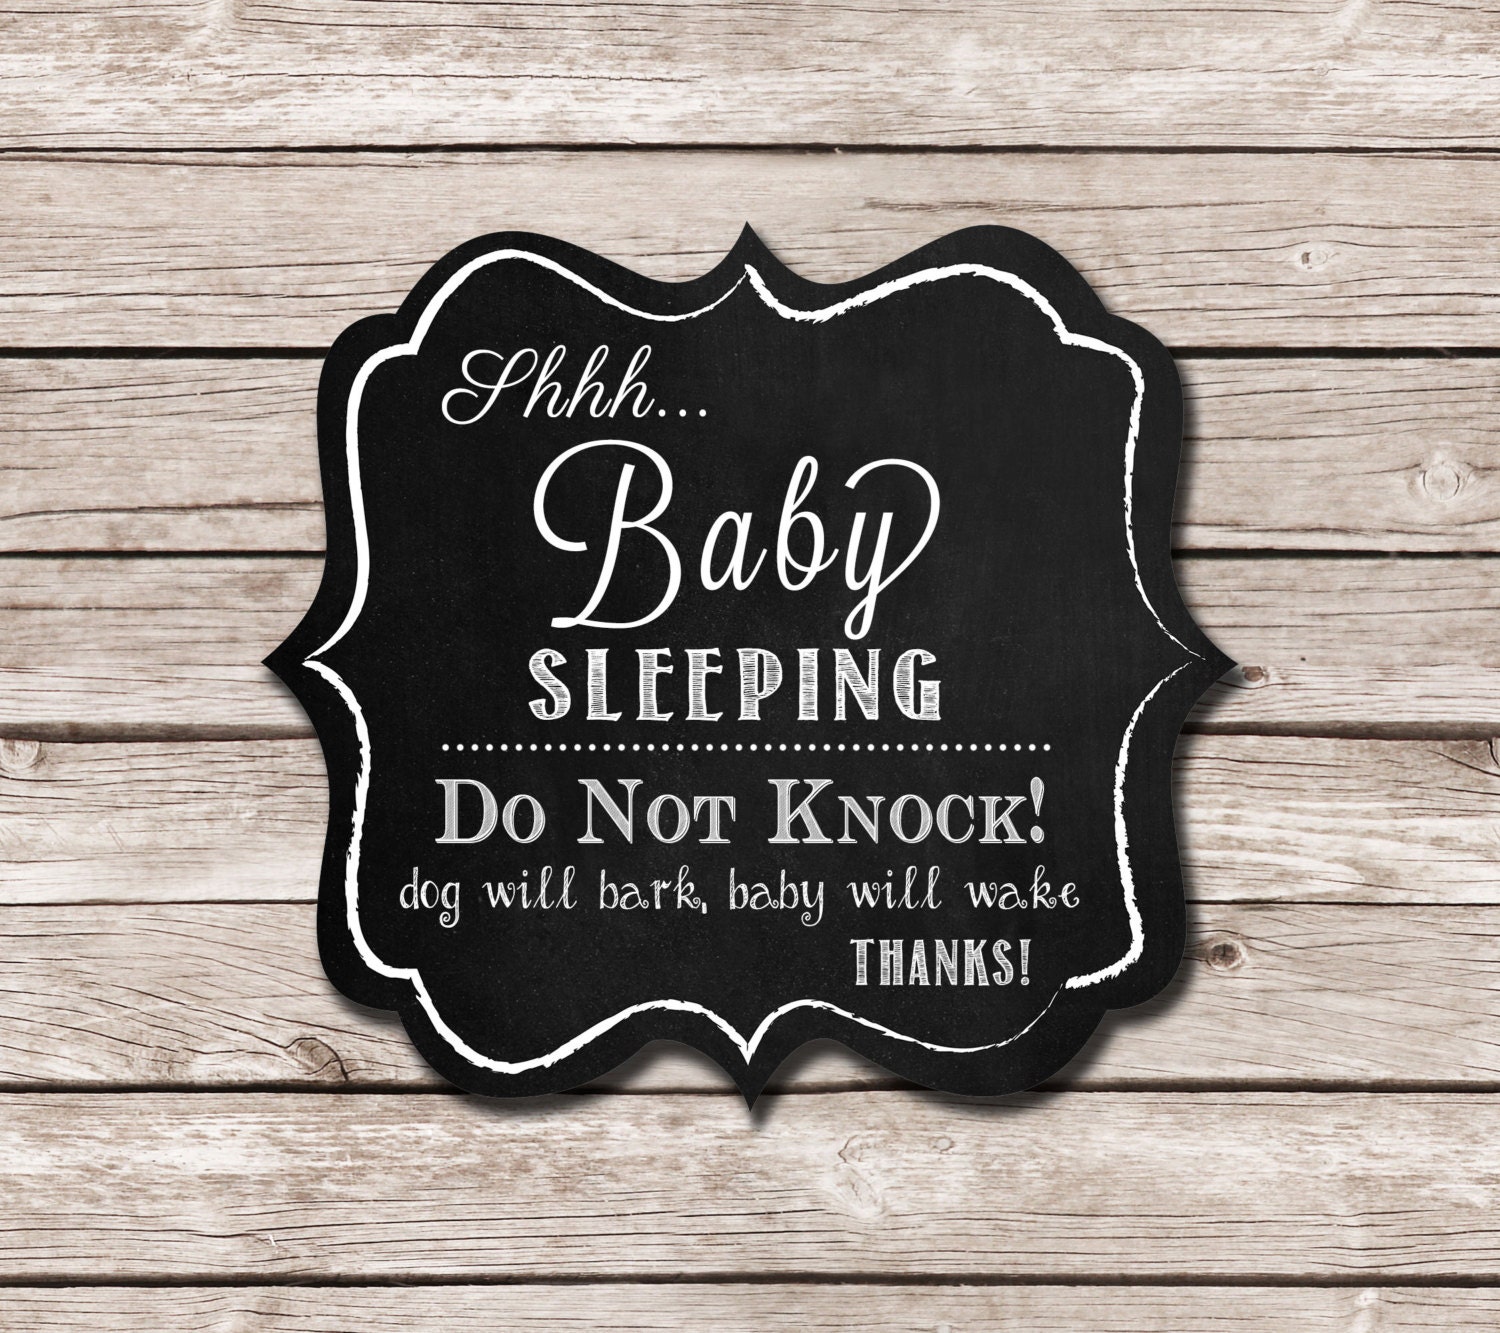 shhh-baby-sleeping-sign-digital-file-by-lalabella-on-etsy